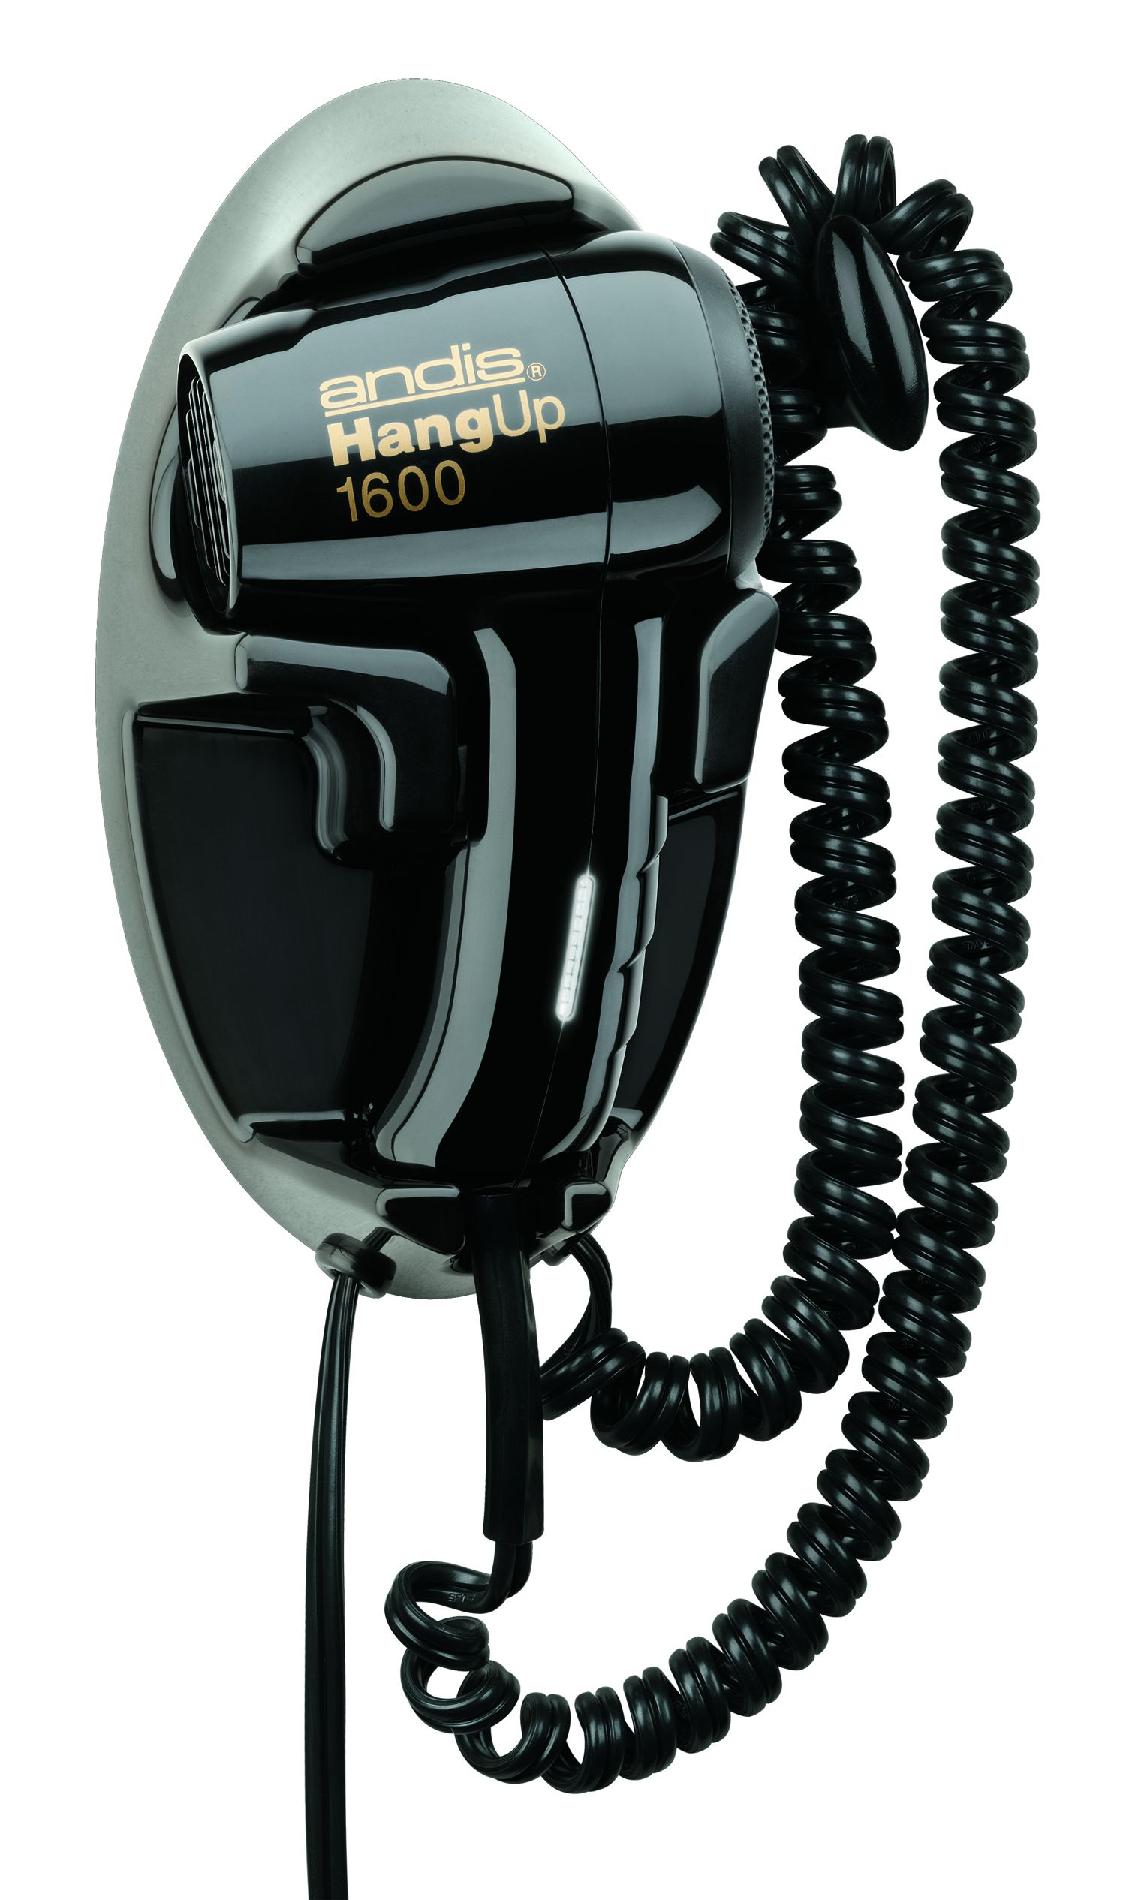 Andis 1600w Hang Up Ionic Dryer